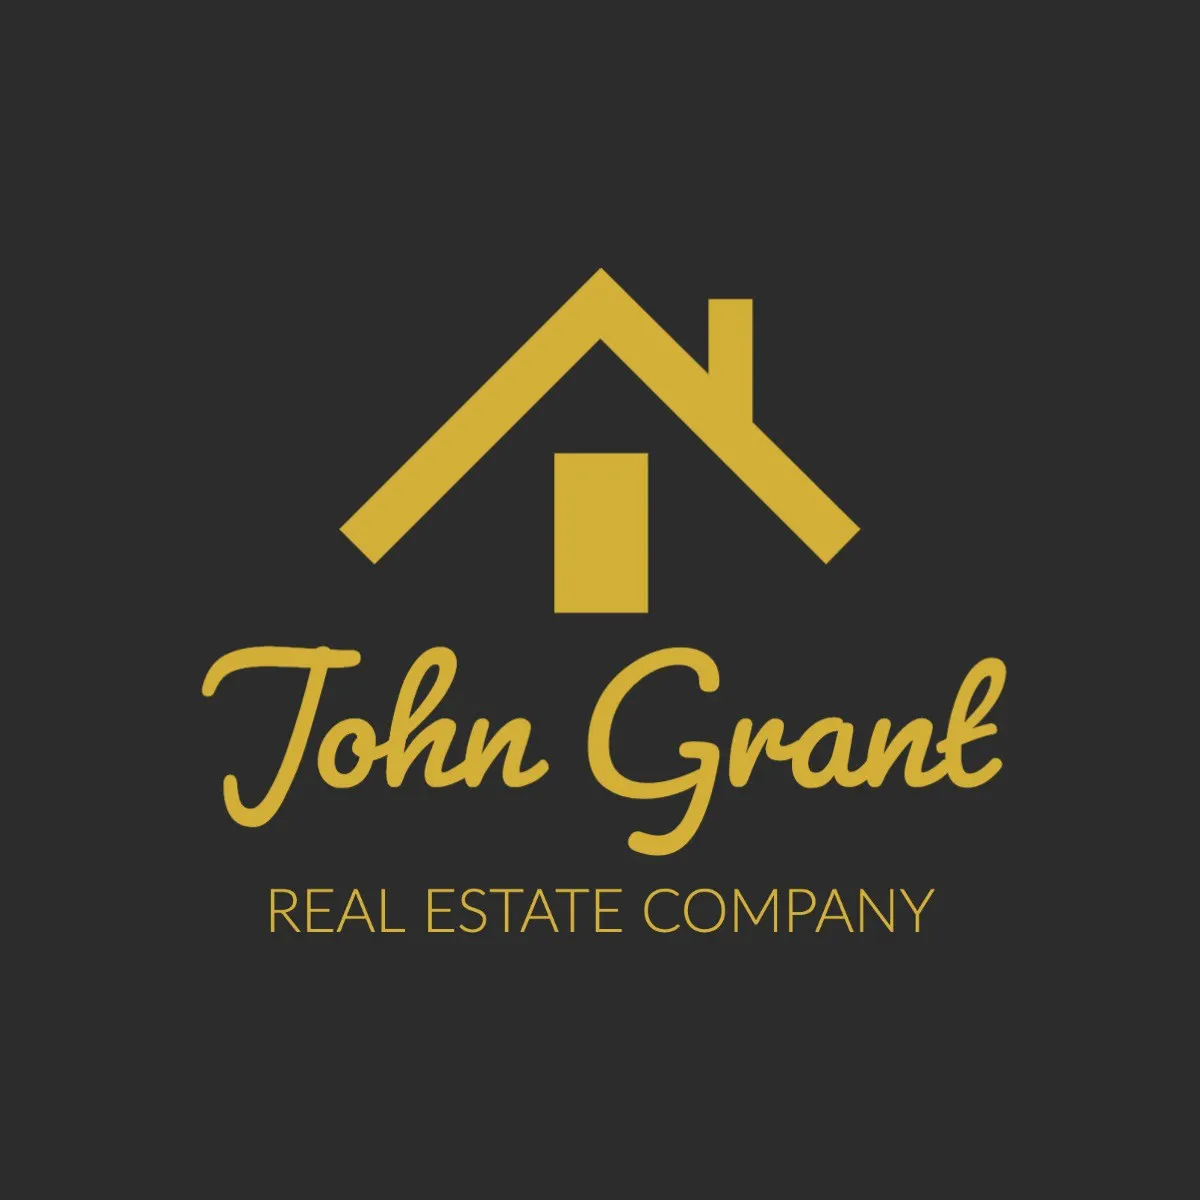 Black and Gold Luxury Real Estate Company Logo